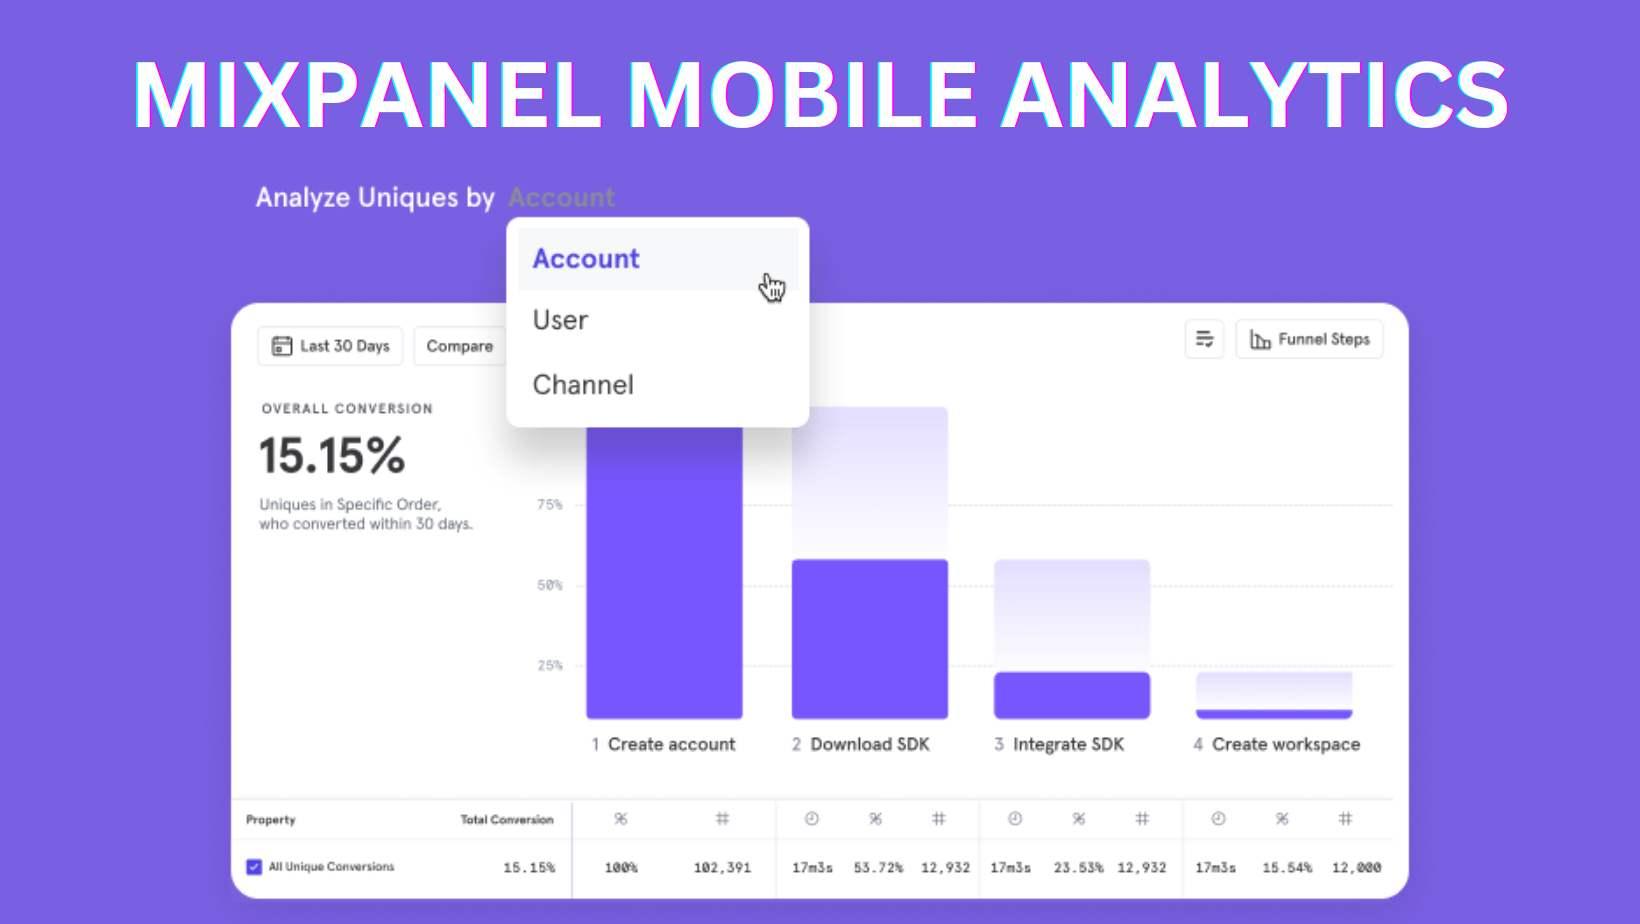 Main Features of mixpanel mobile analytics